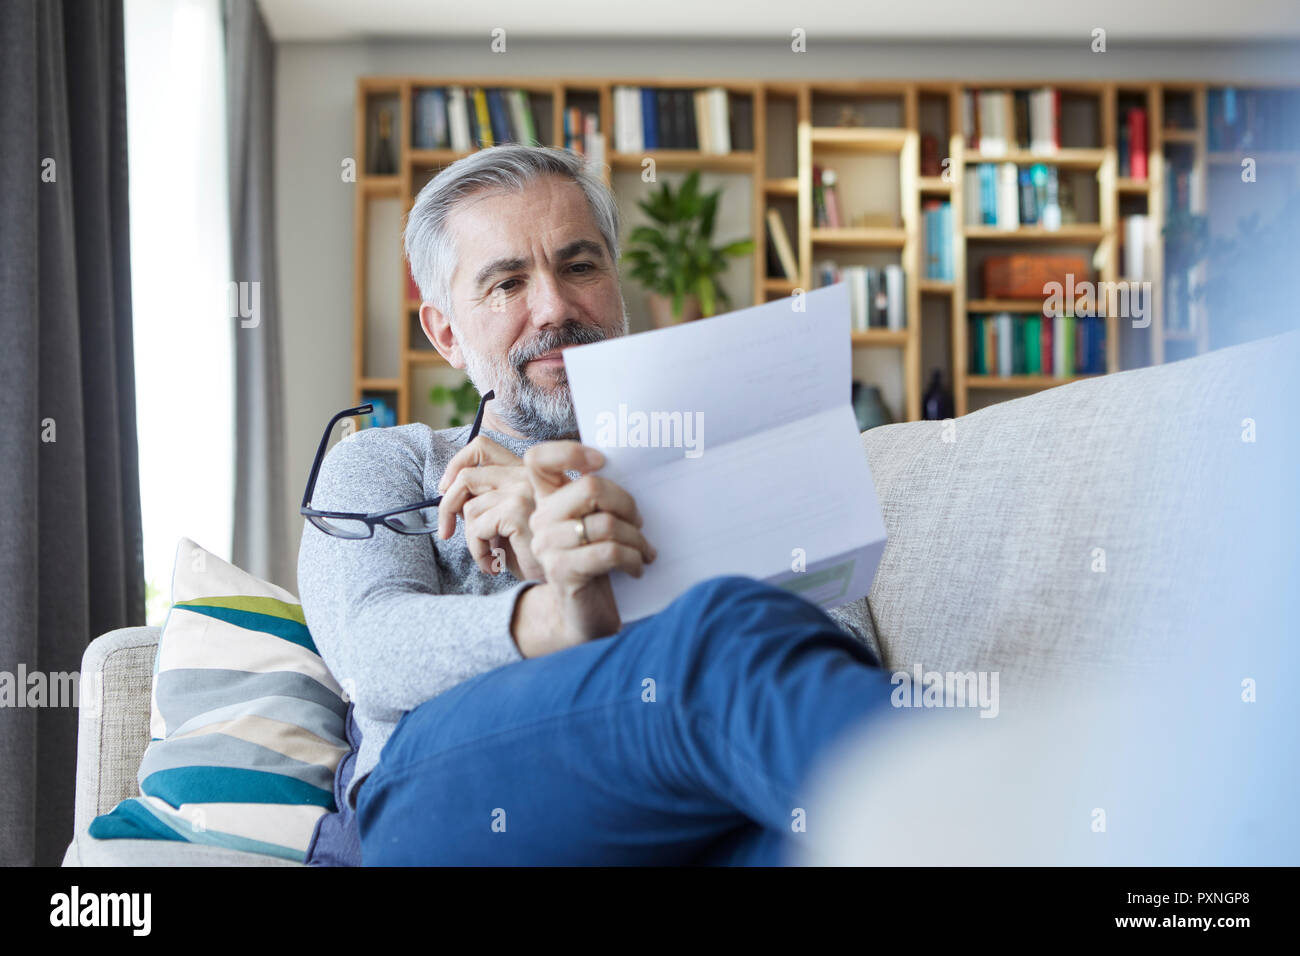 Man sitting on sofa at home reading lettre Banque D'Images